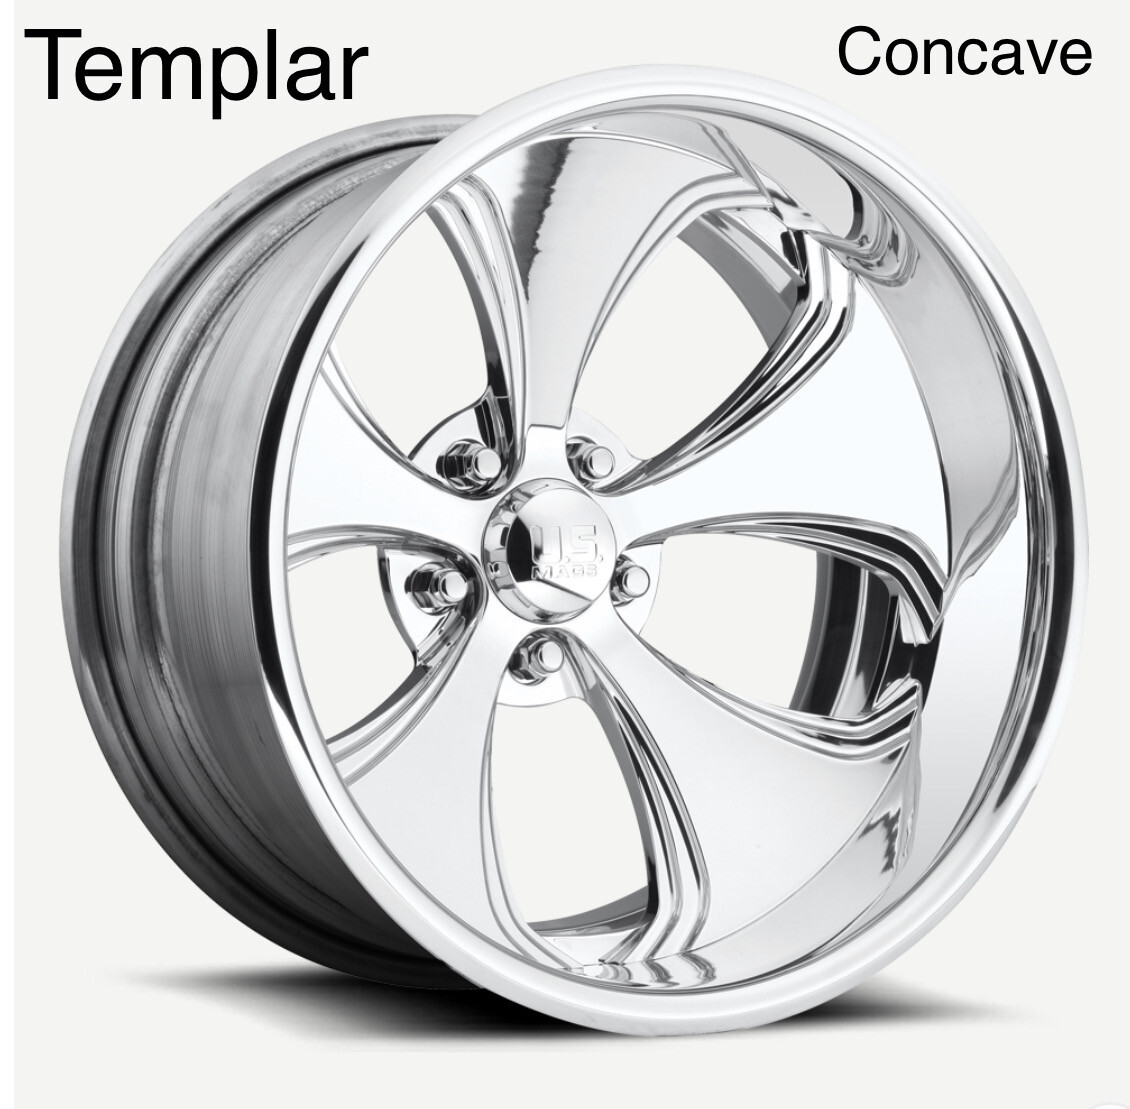 US Mags Templar Wheels. Call To order.